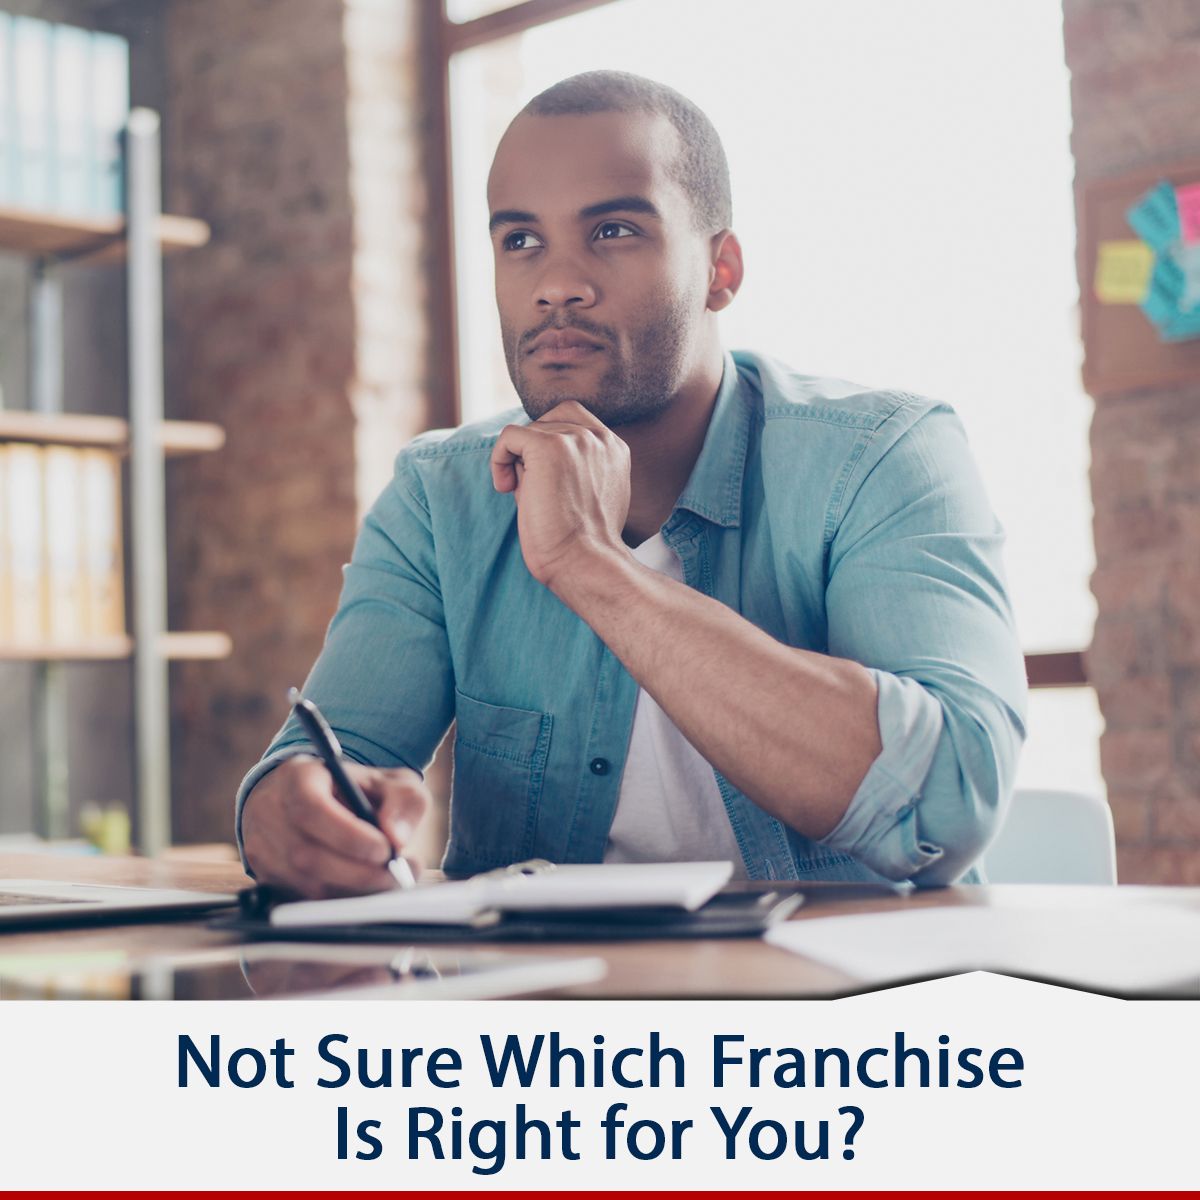 Not Sure Which Franchise Is Right for You?